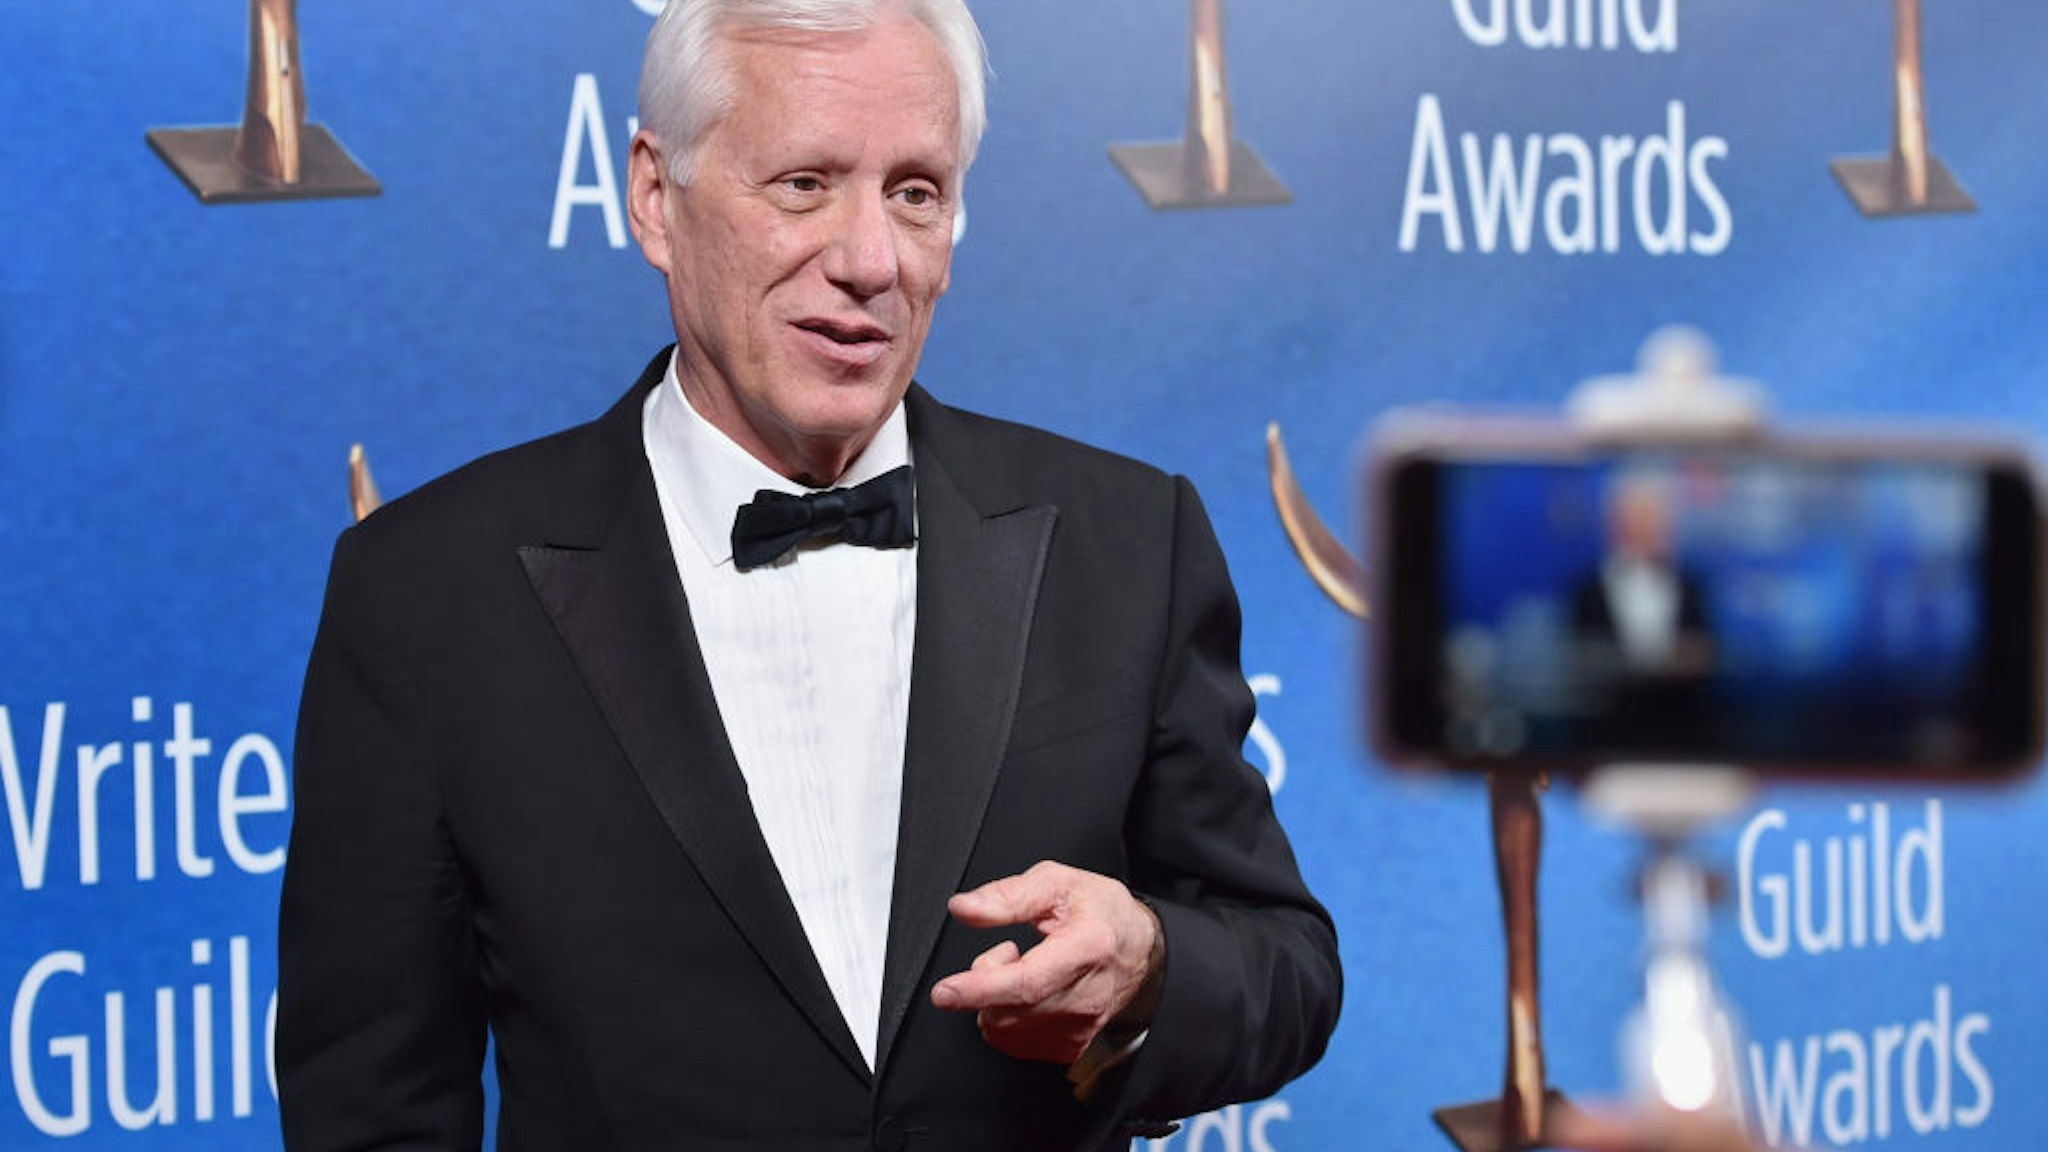 Actor James Woods attends the 2017 Writers Guild Awards L.A. Ceremony at The Beverly Hilton Hotel on February 19, 2017 in Beverly Hills, California.